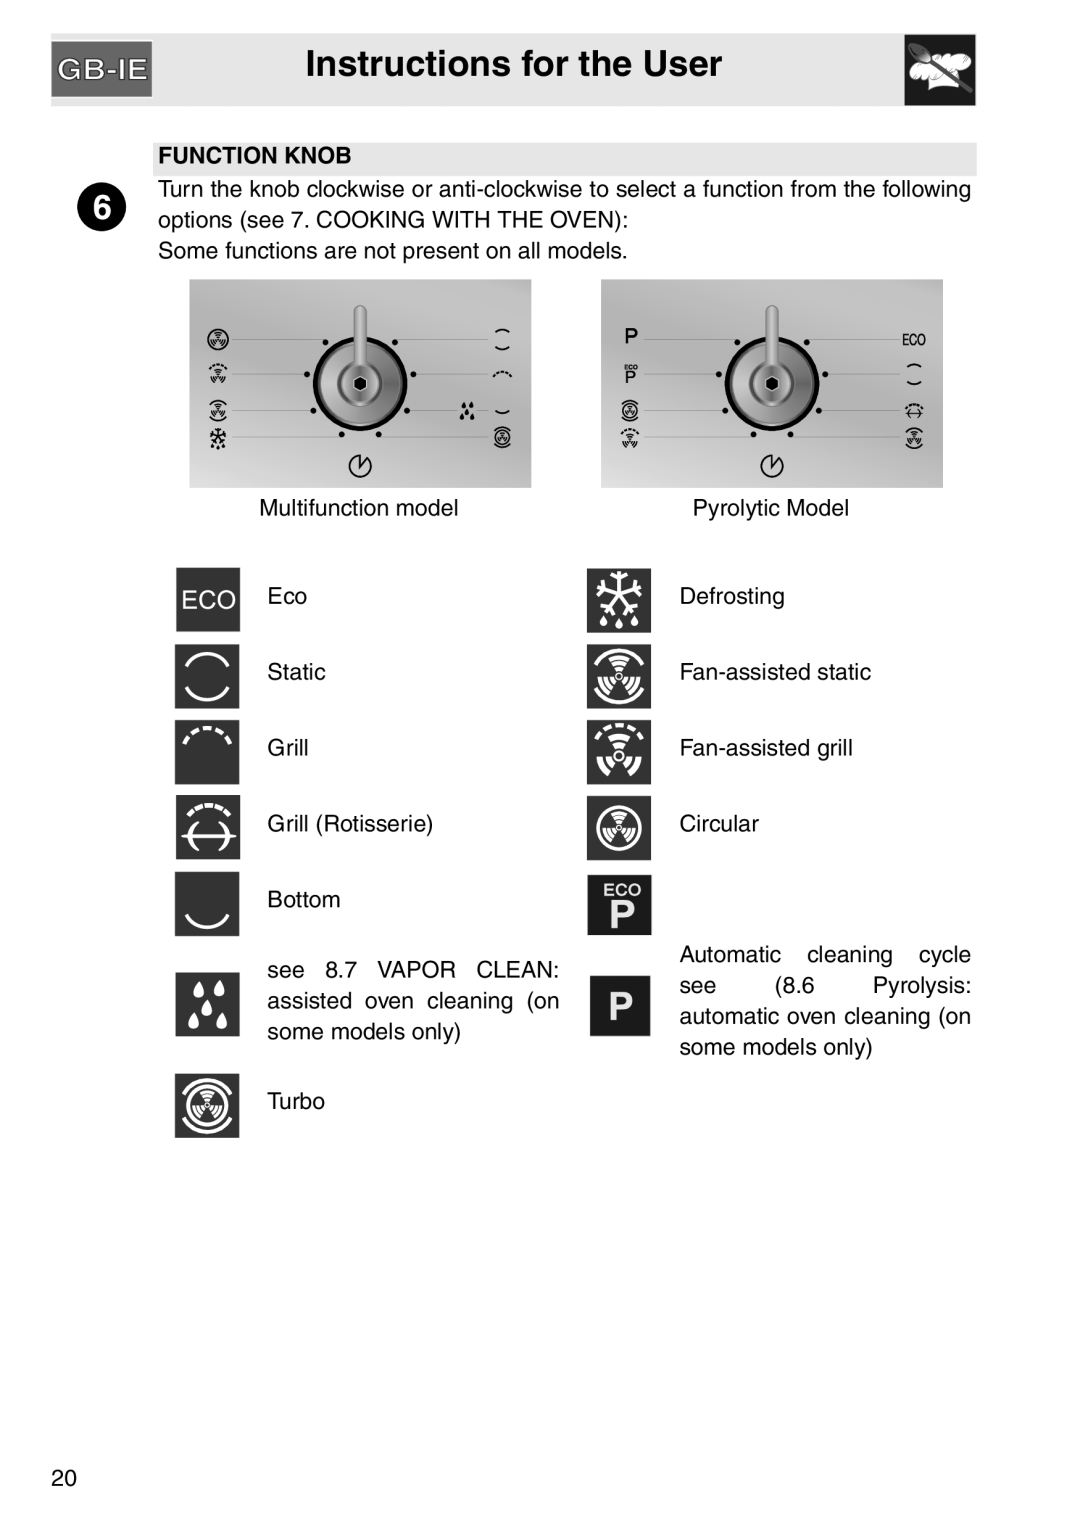 Smeg SA561X-9 installation instructions Instructions for the User, Function Knob 